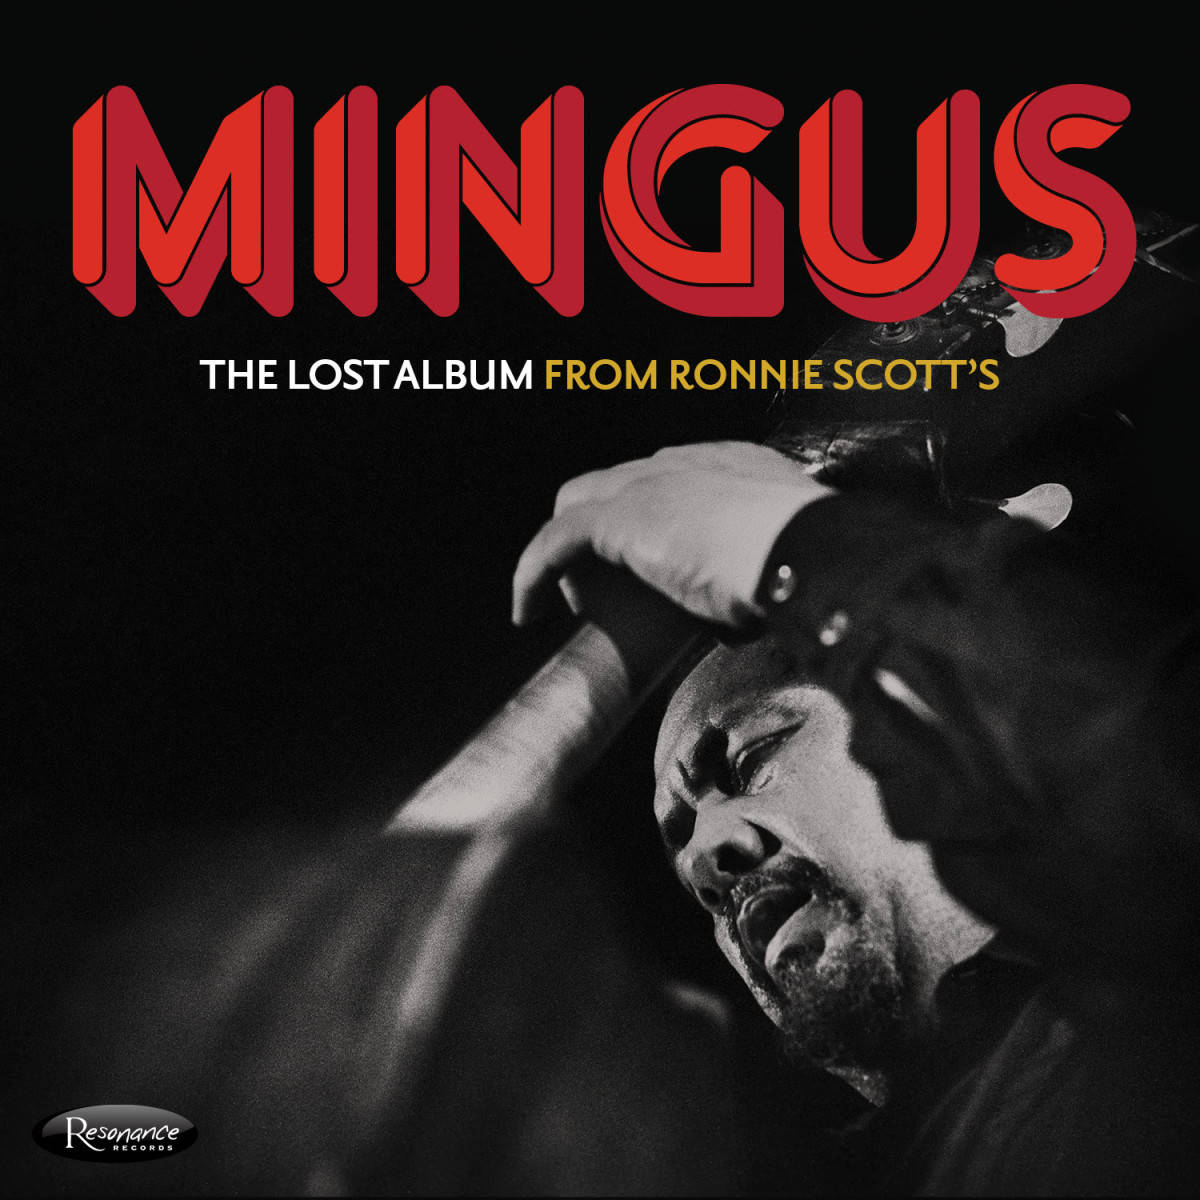 Charles Mingus The Lost Album From Ronnie Scott's Wallpaper